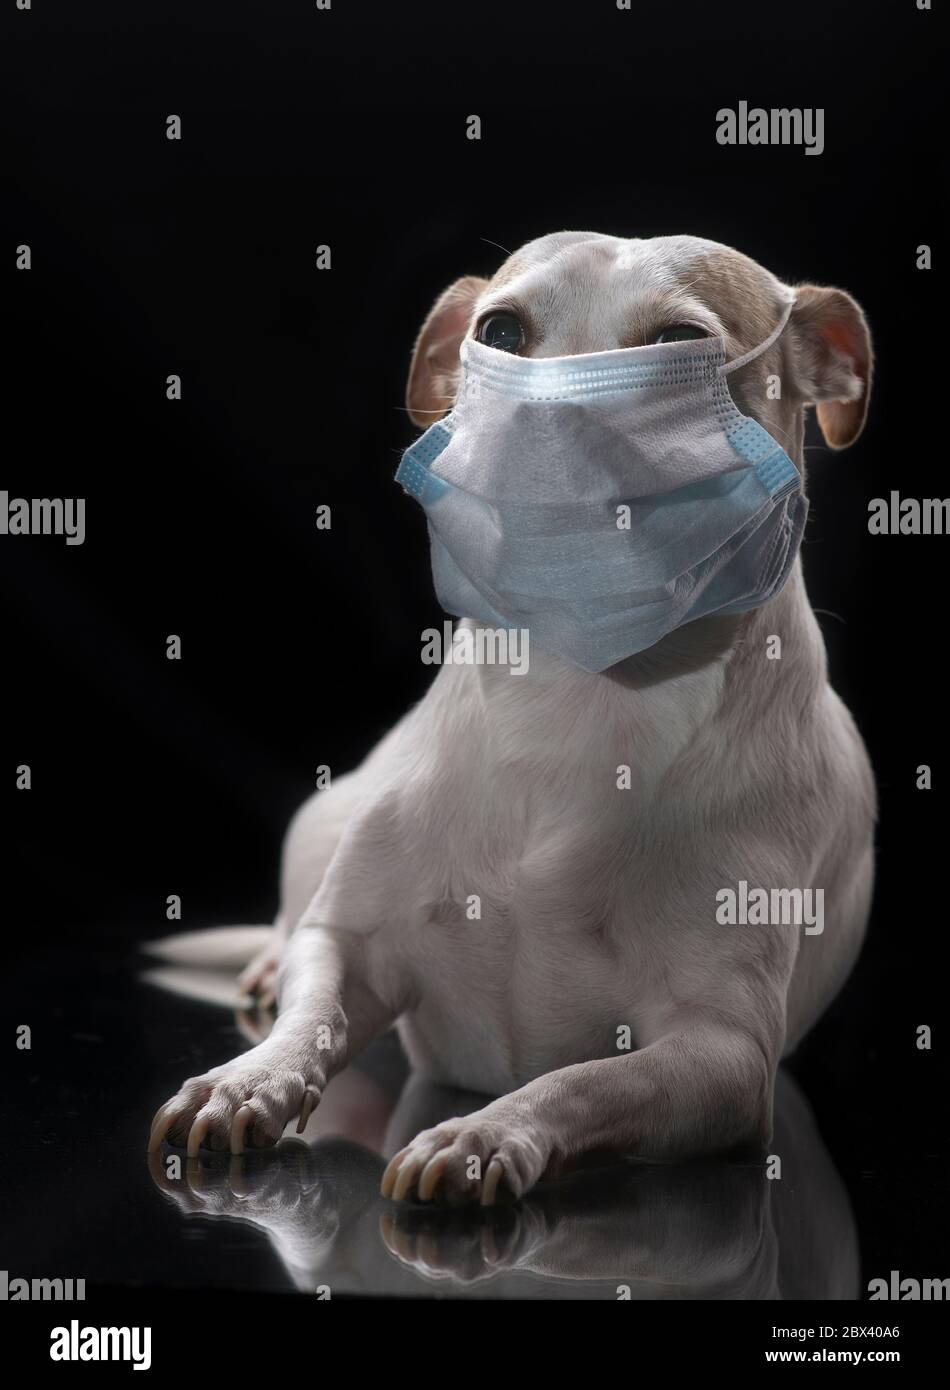 A white small breed dog wearing face cover or face mask. COVID 19 pandemic concept, in a black background Stock Photo